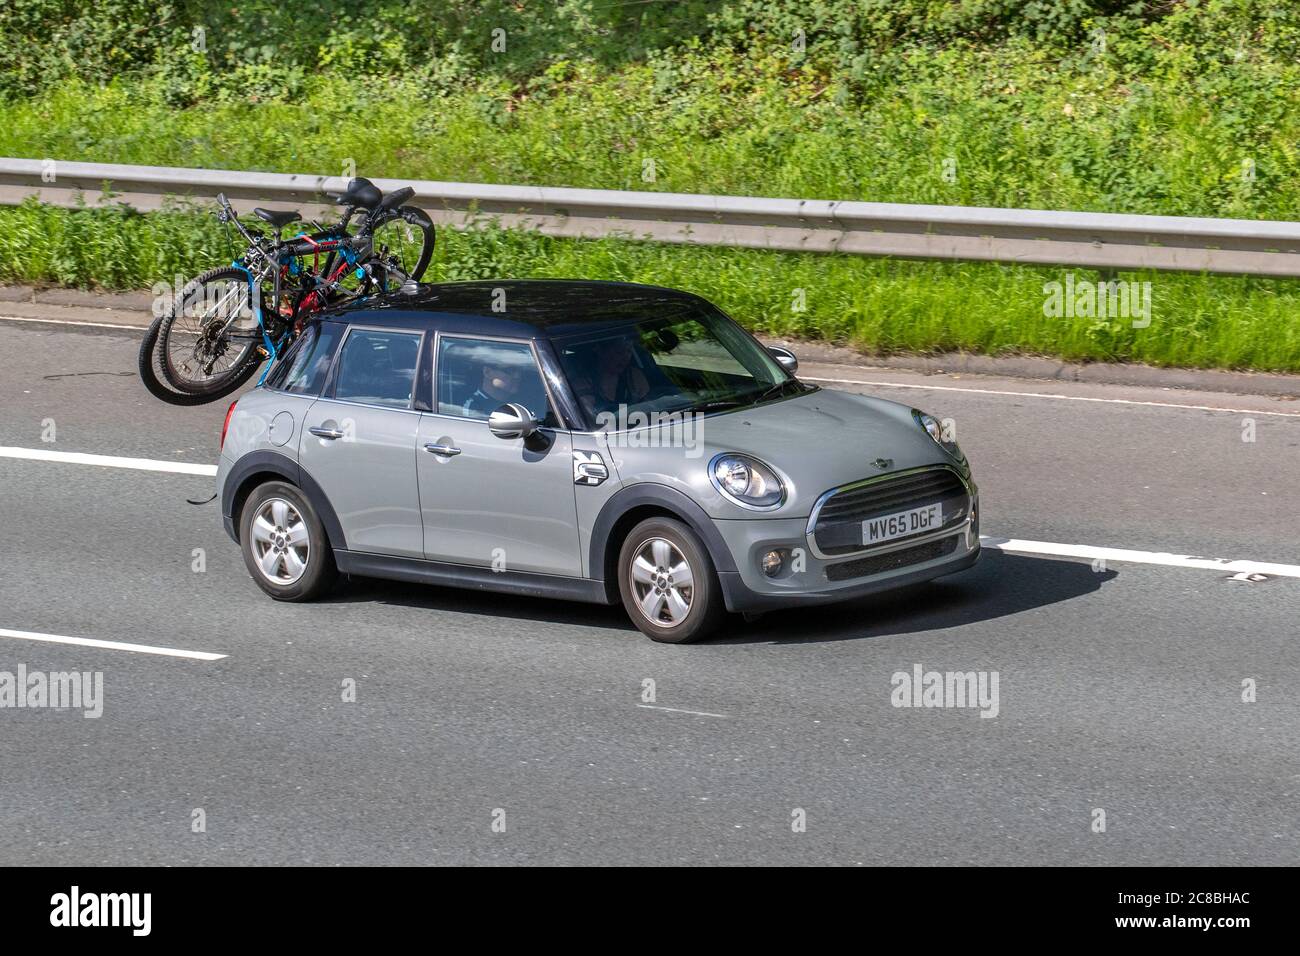 2015 grey Mini Cooper Auto bike bicycles cycles on car roof rack; Vehicular  traffic moving vehicles, cars driving vehicle on UK roads, motors, motoring  on the M6 motorway highway network Stock Photo -